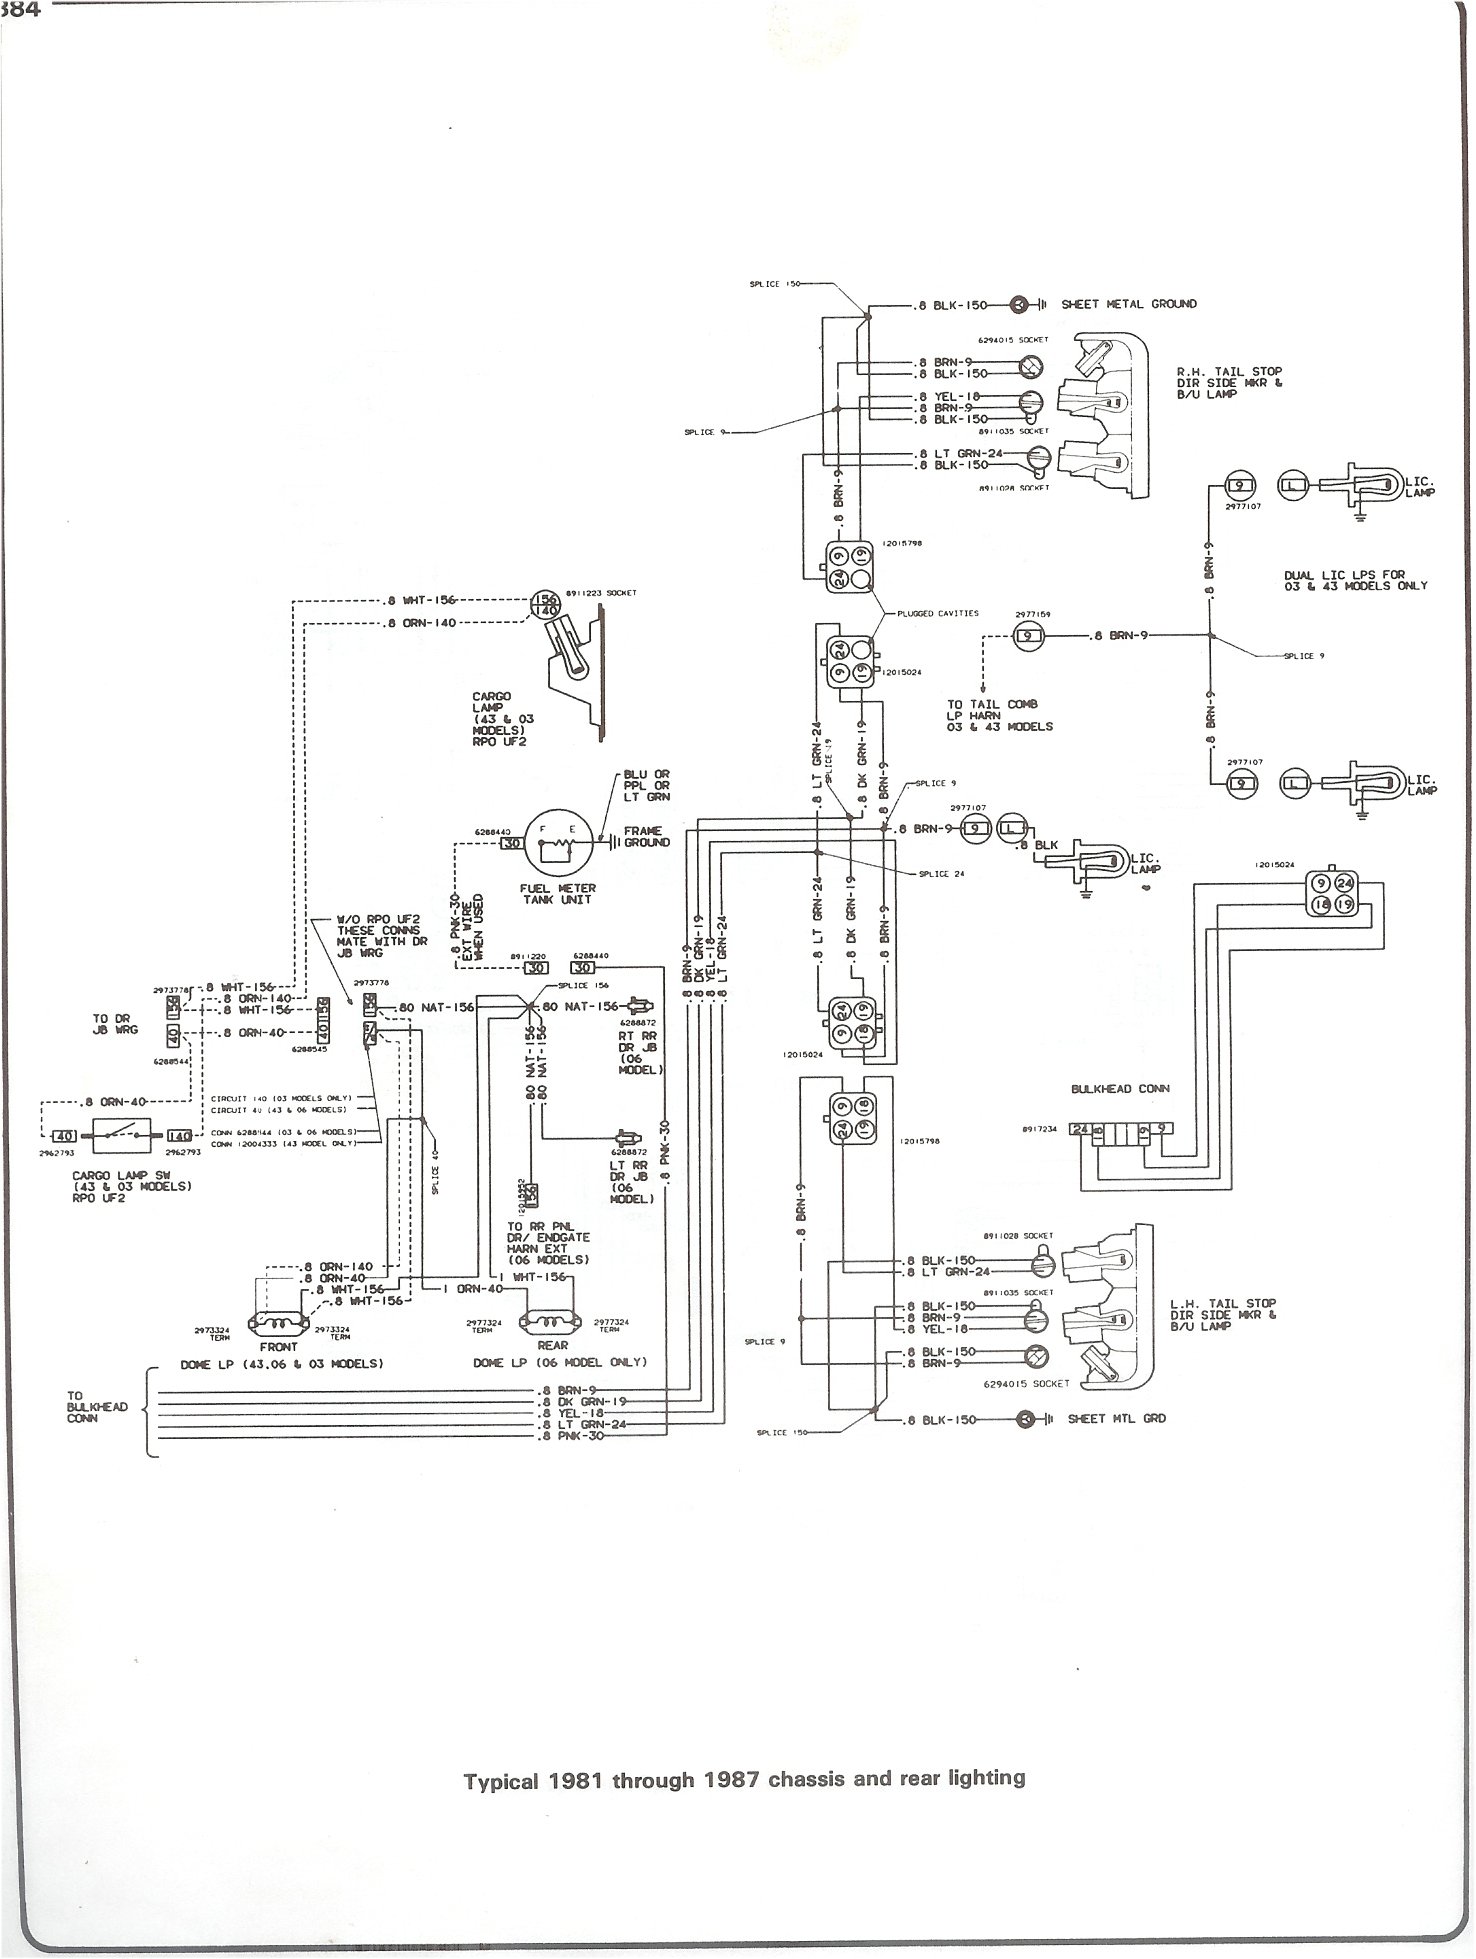 1970 C10 Ignition Switch Wiring Diagram from getdrawings.com